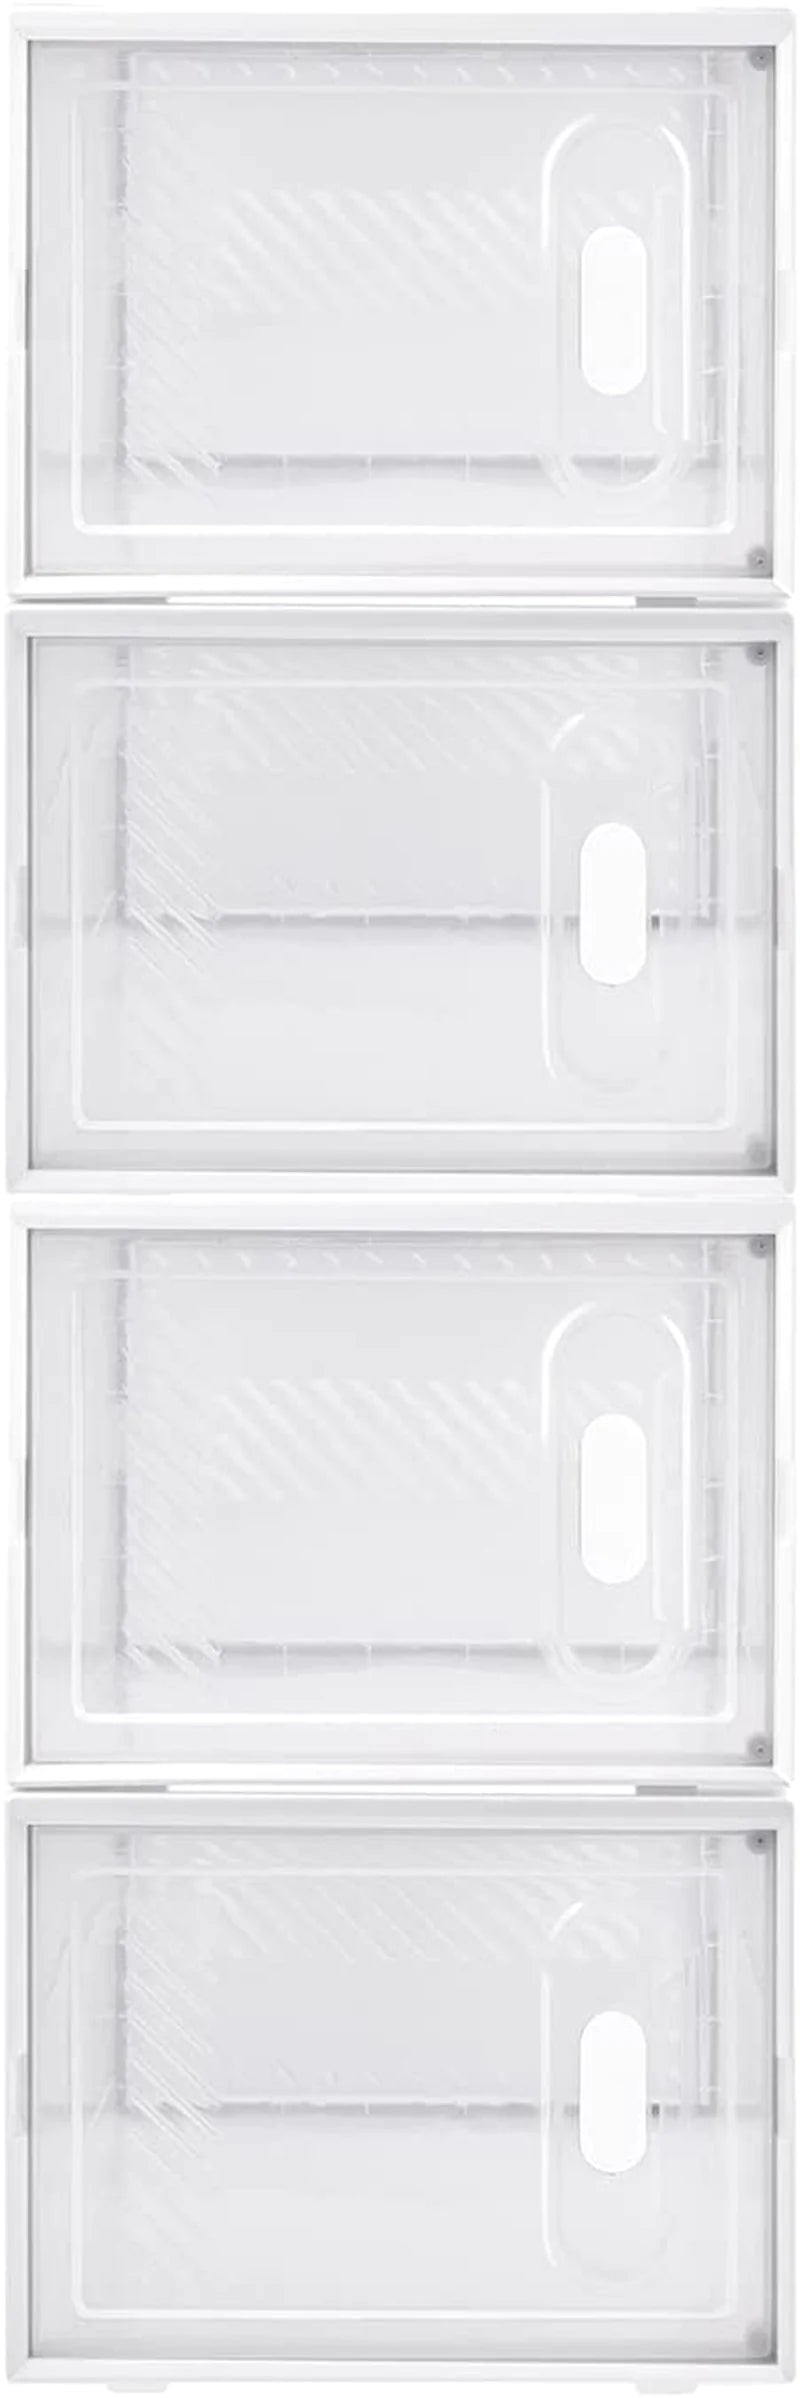 Zttopo XL Shoe Storage Box, 8 Packs Clear Plastic Stackable Shoe Organizer Bins Containers, X-Large up to US Size 12, Front Drop Shoe Boxes Holder with Lids Sneaker Storage Case for Sneakerheads